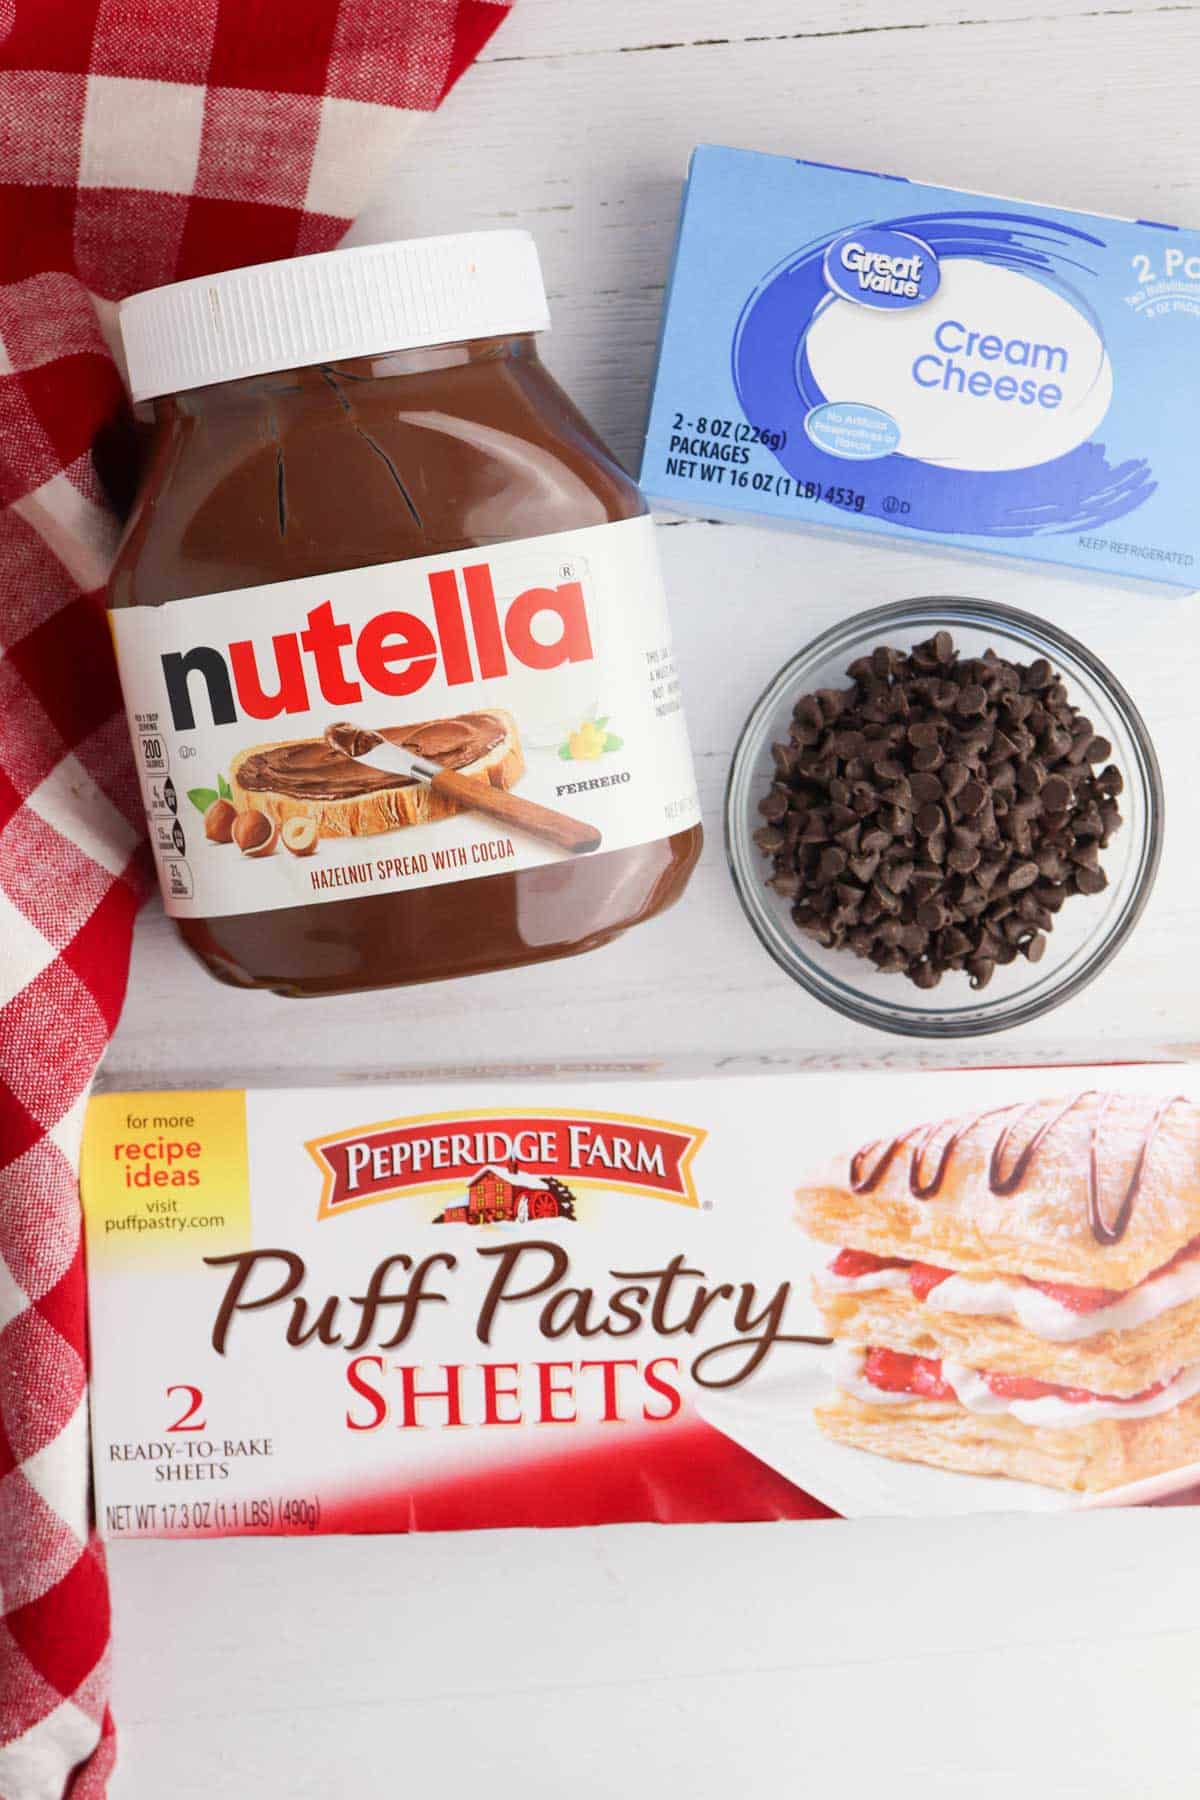 Nutella puff pastry sheets and chocolate chips on a checkered table.